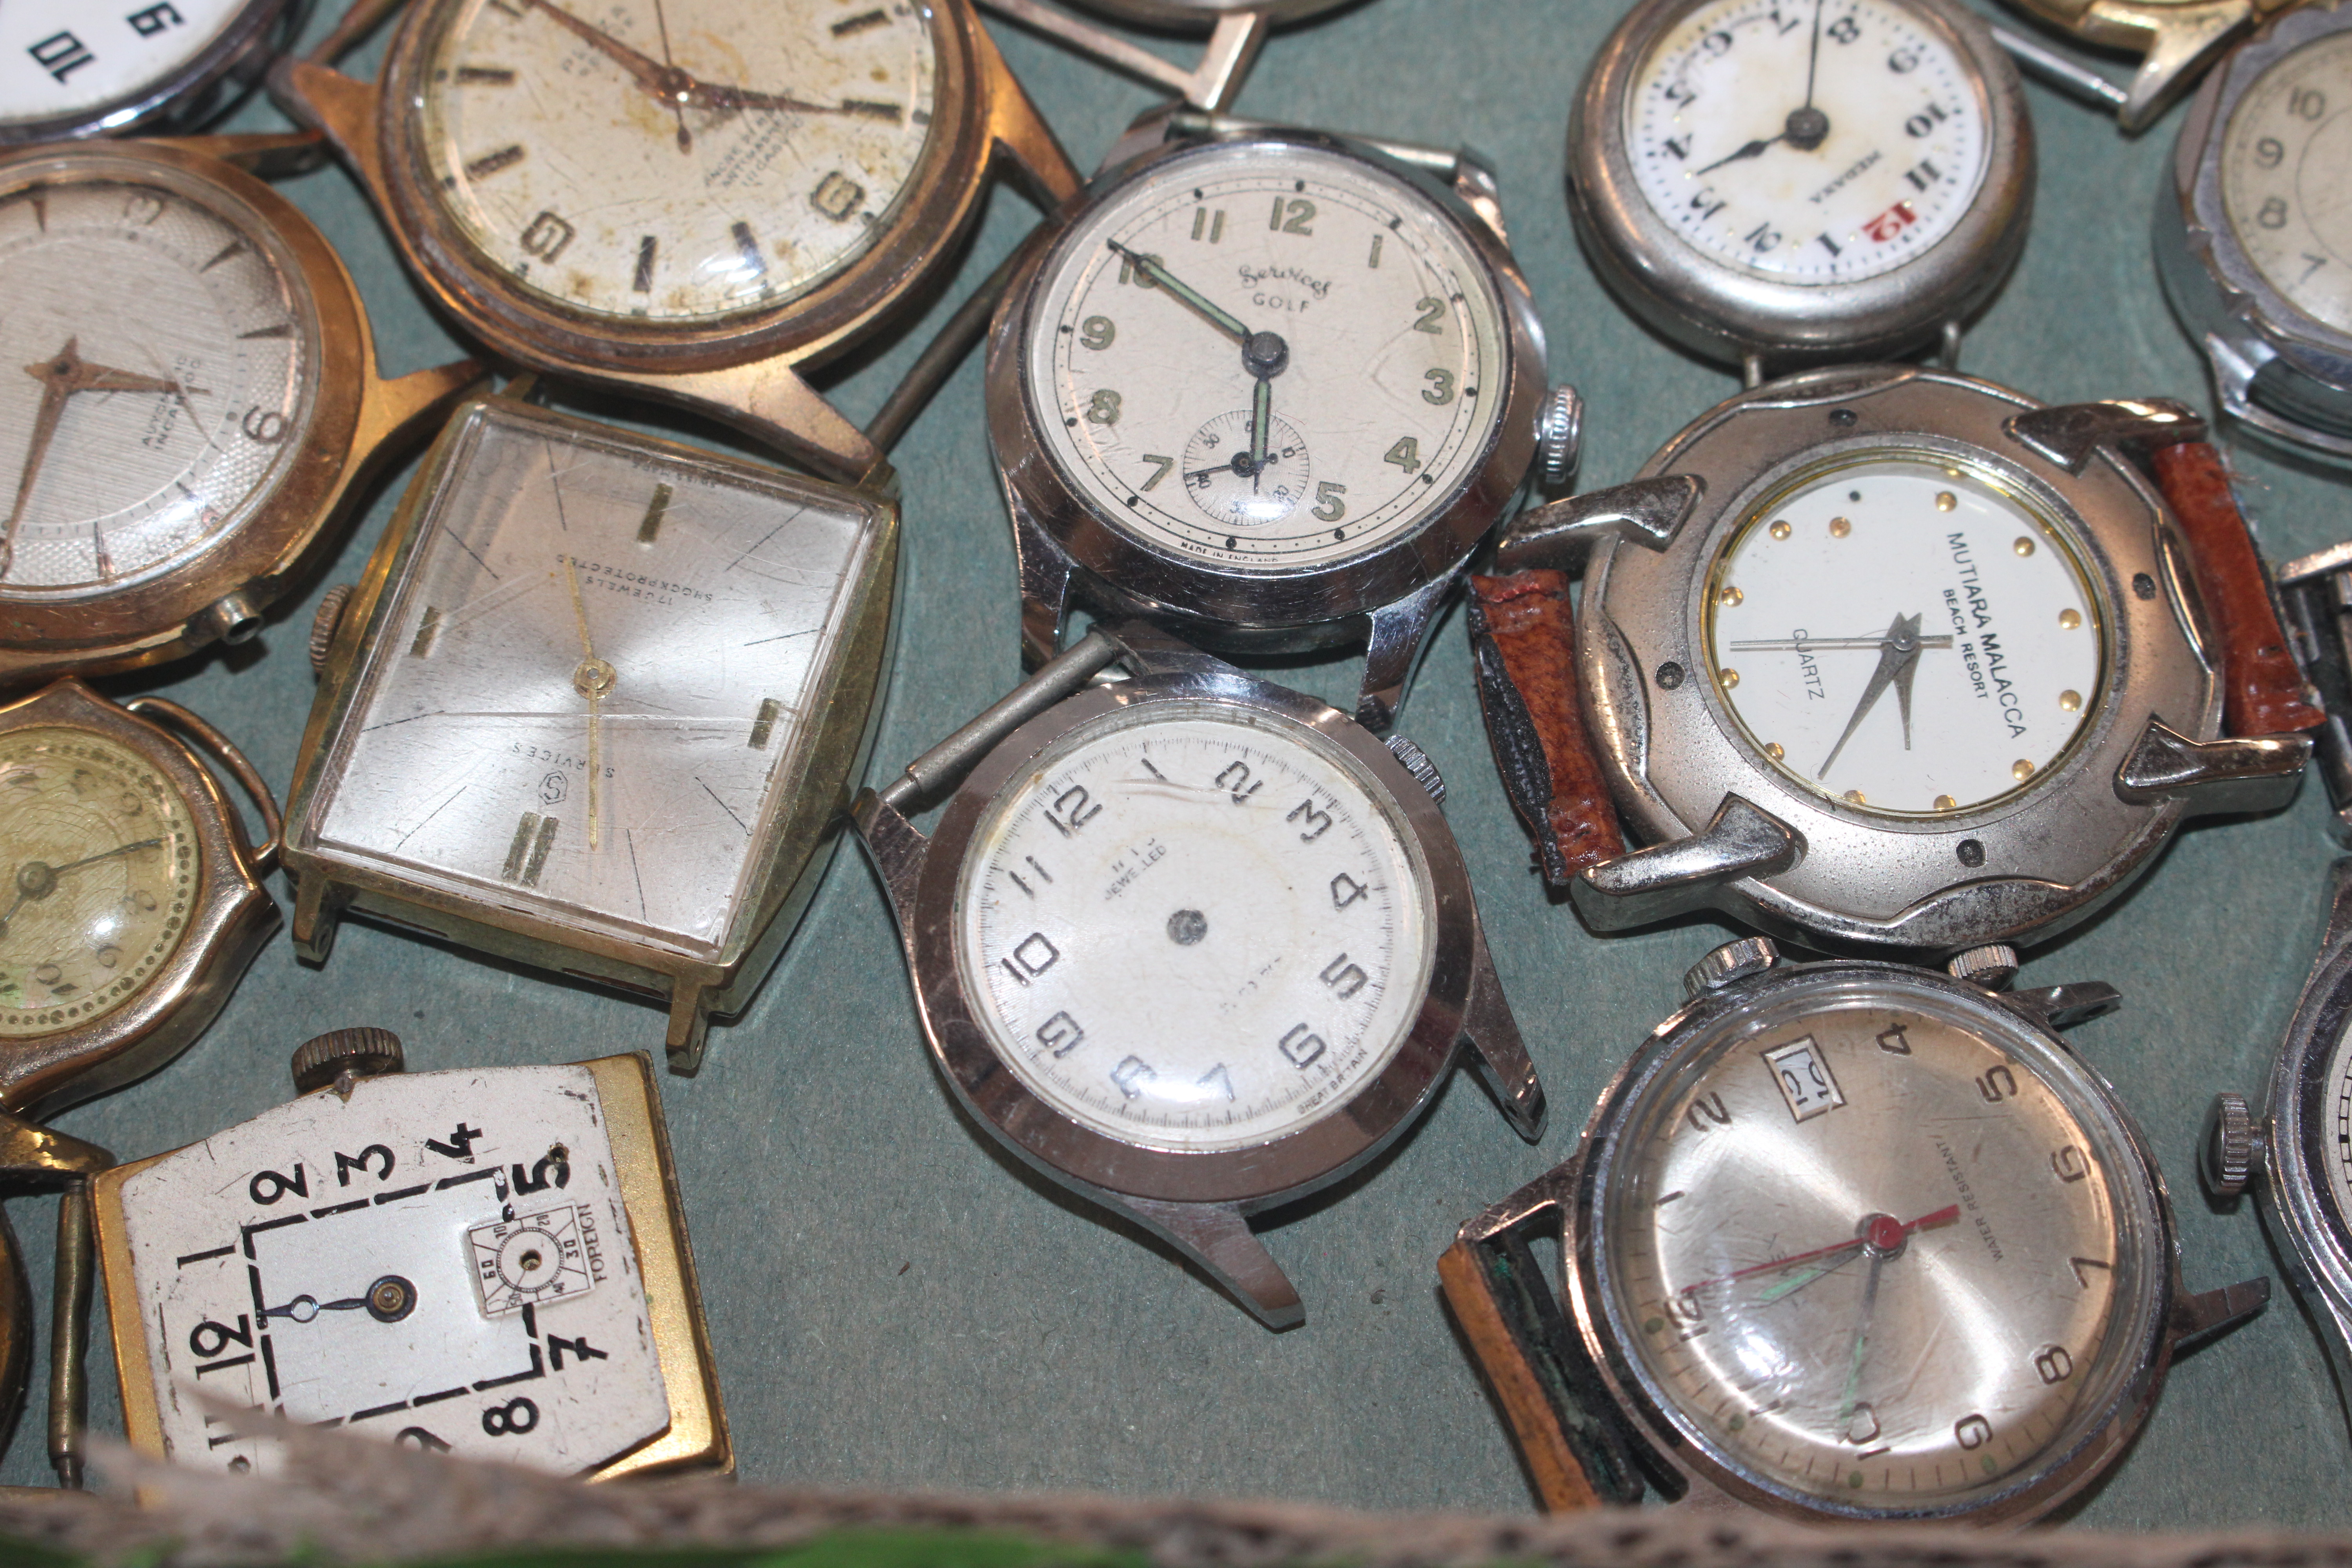 A tray of vintage and other watches for spares and - Image 5 of 8